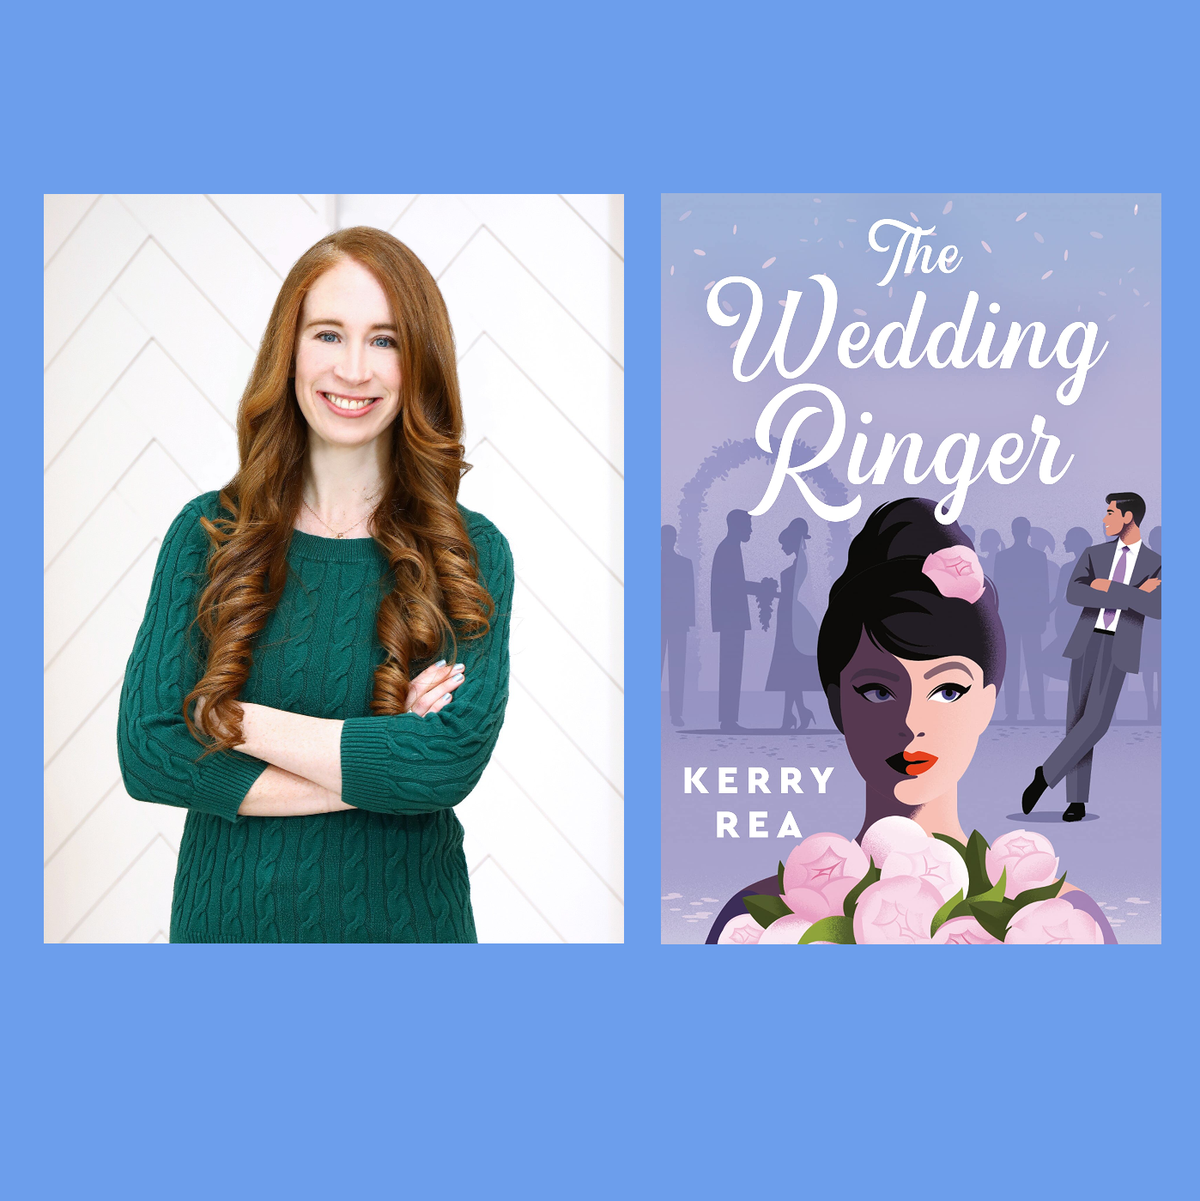 kerry rea, author of 'the wedding ringer'